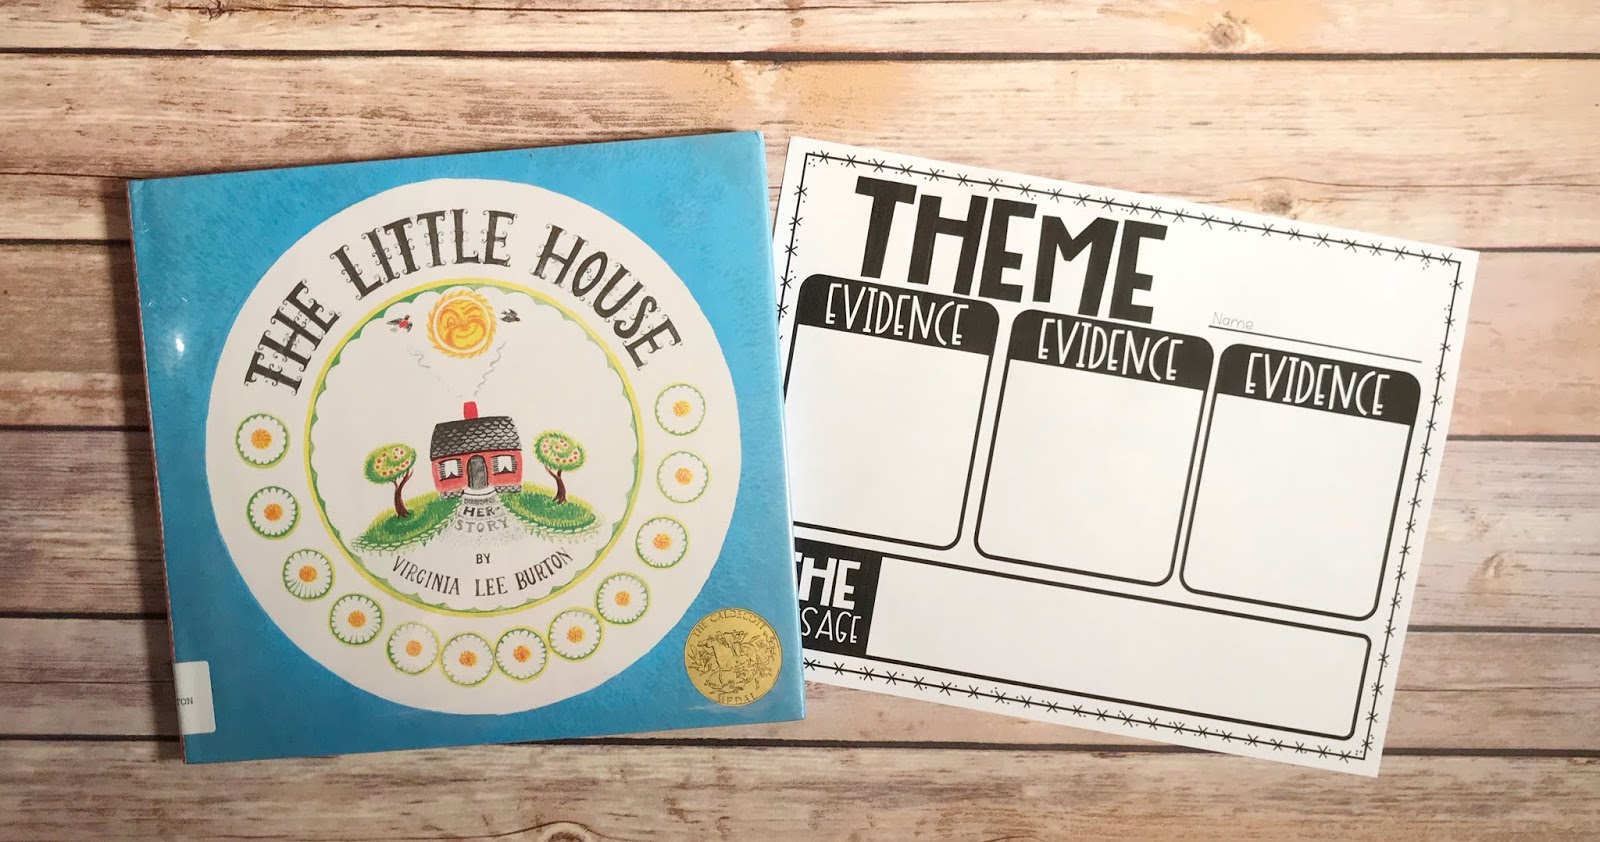 Mentor Text with text "The Little House" and Graphic Organizer with text "Theme"